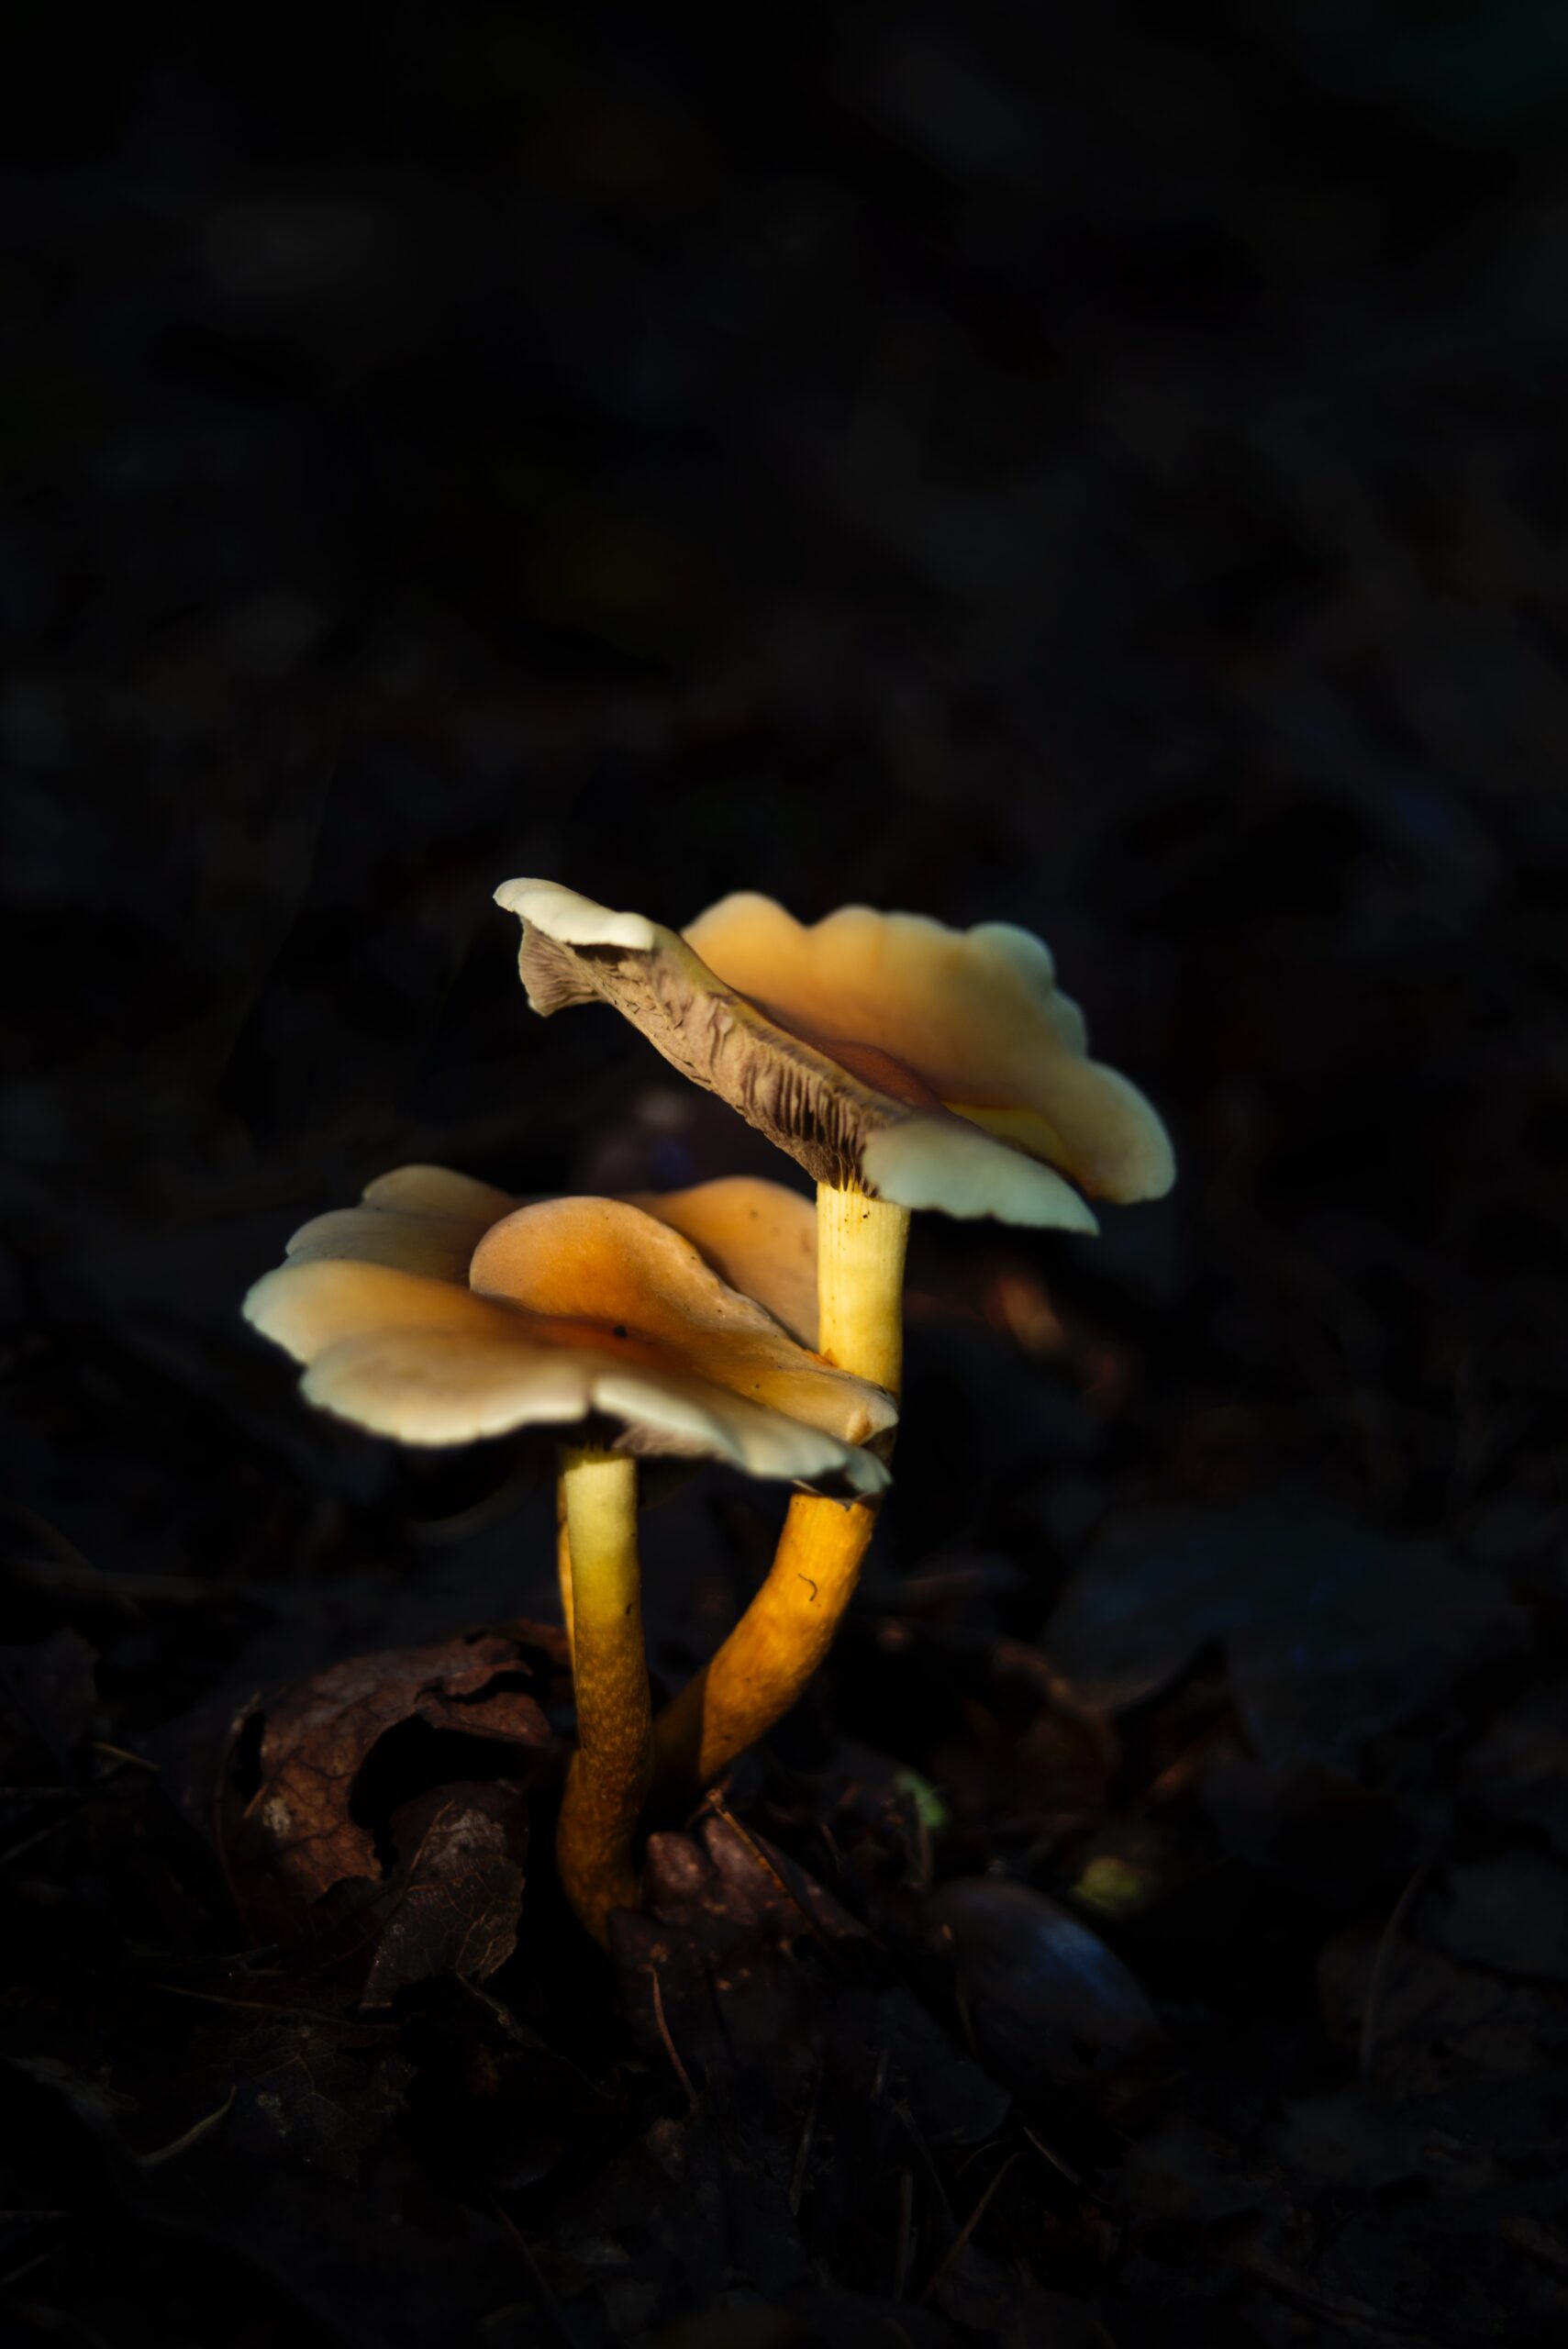 Is Light Necessary for the Growth of Mushrooms